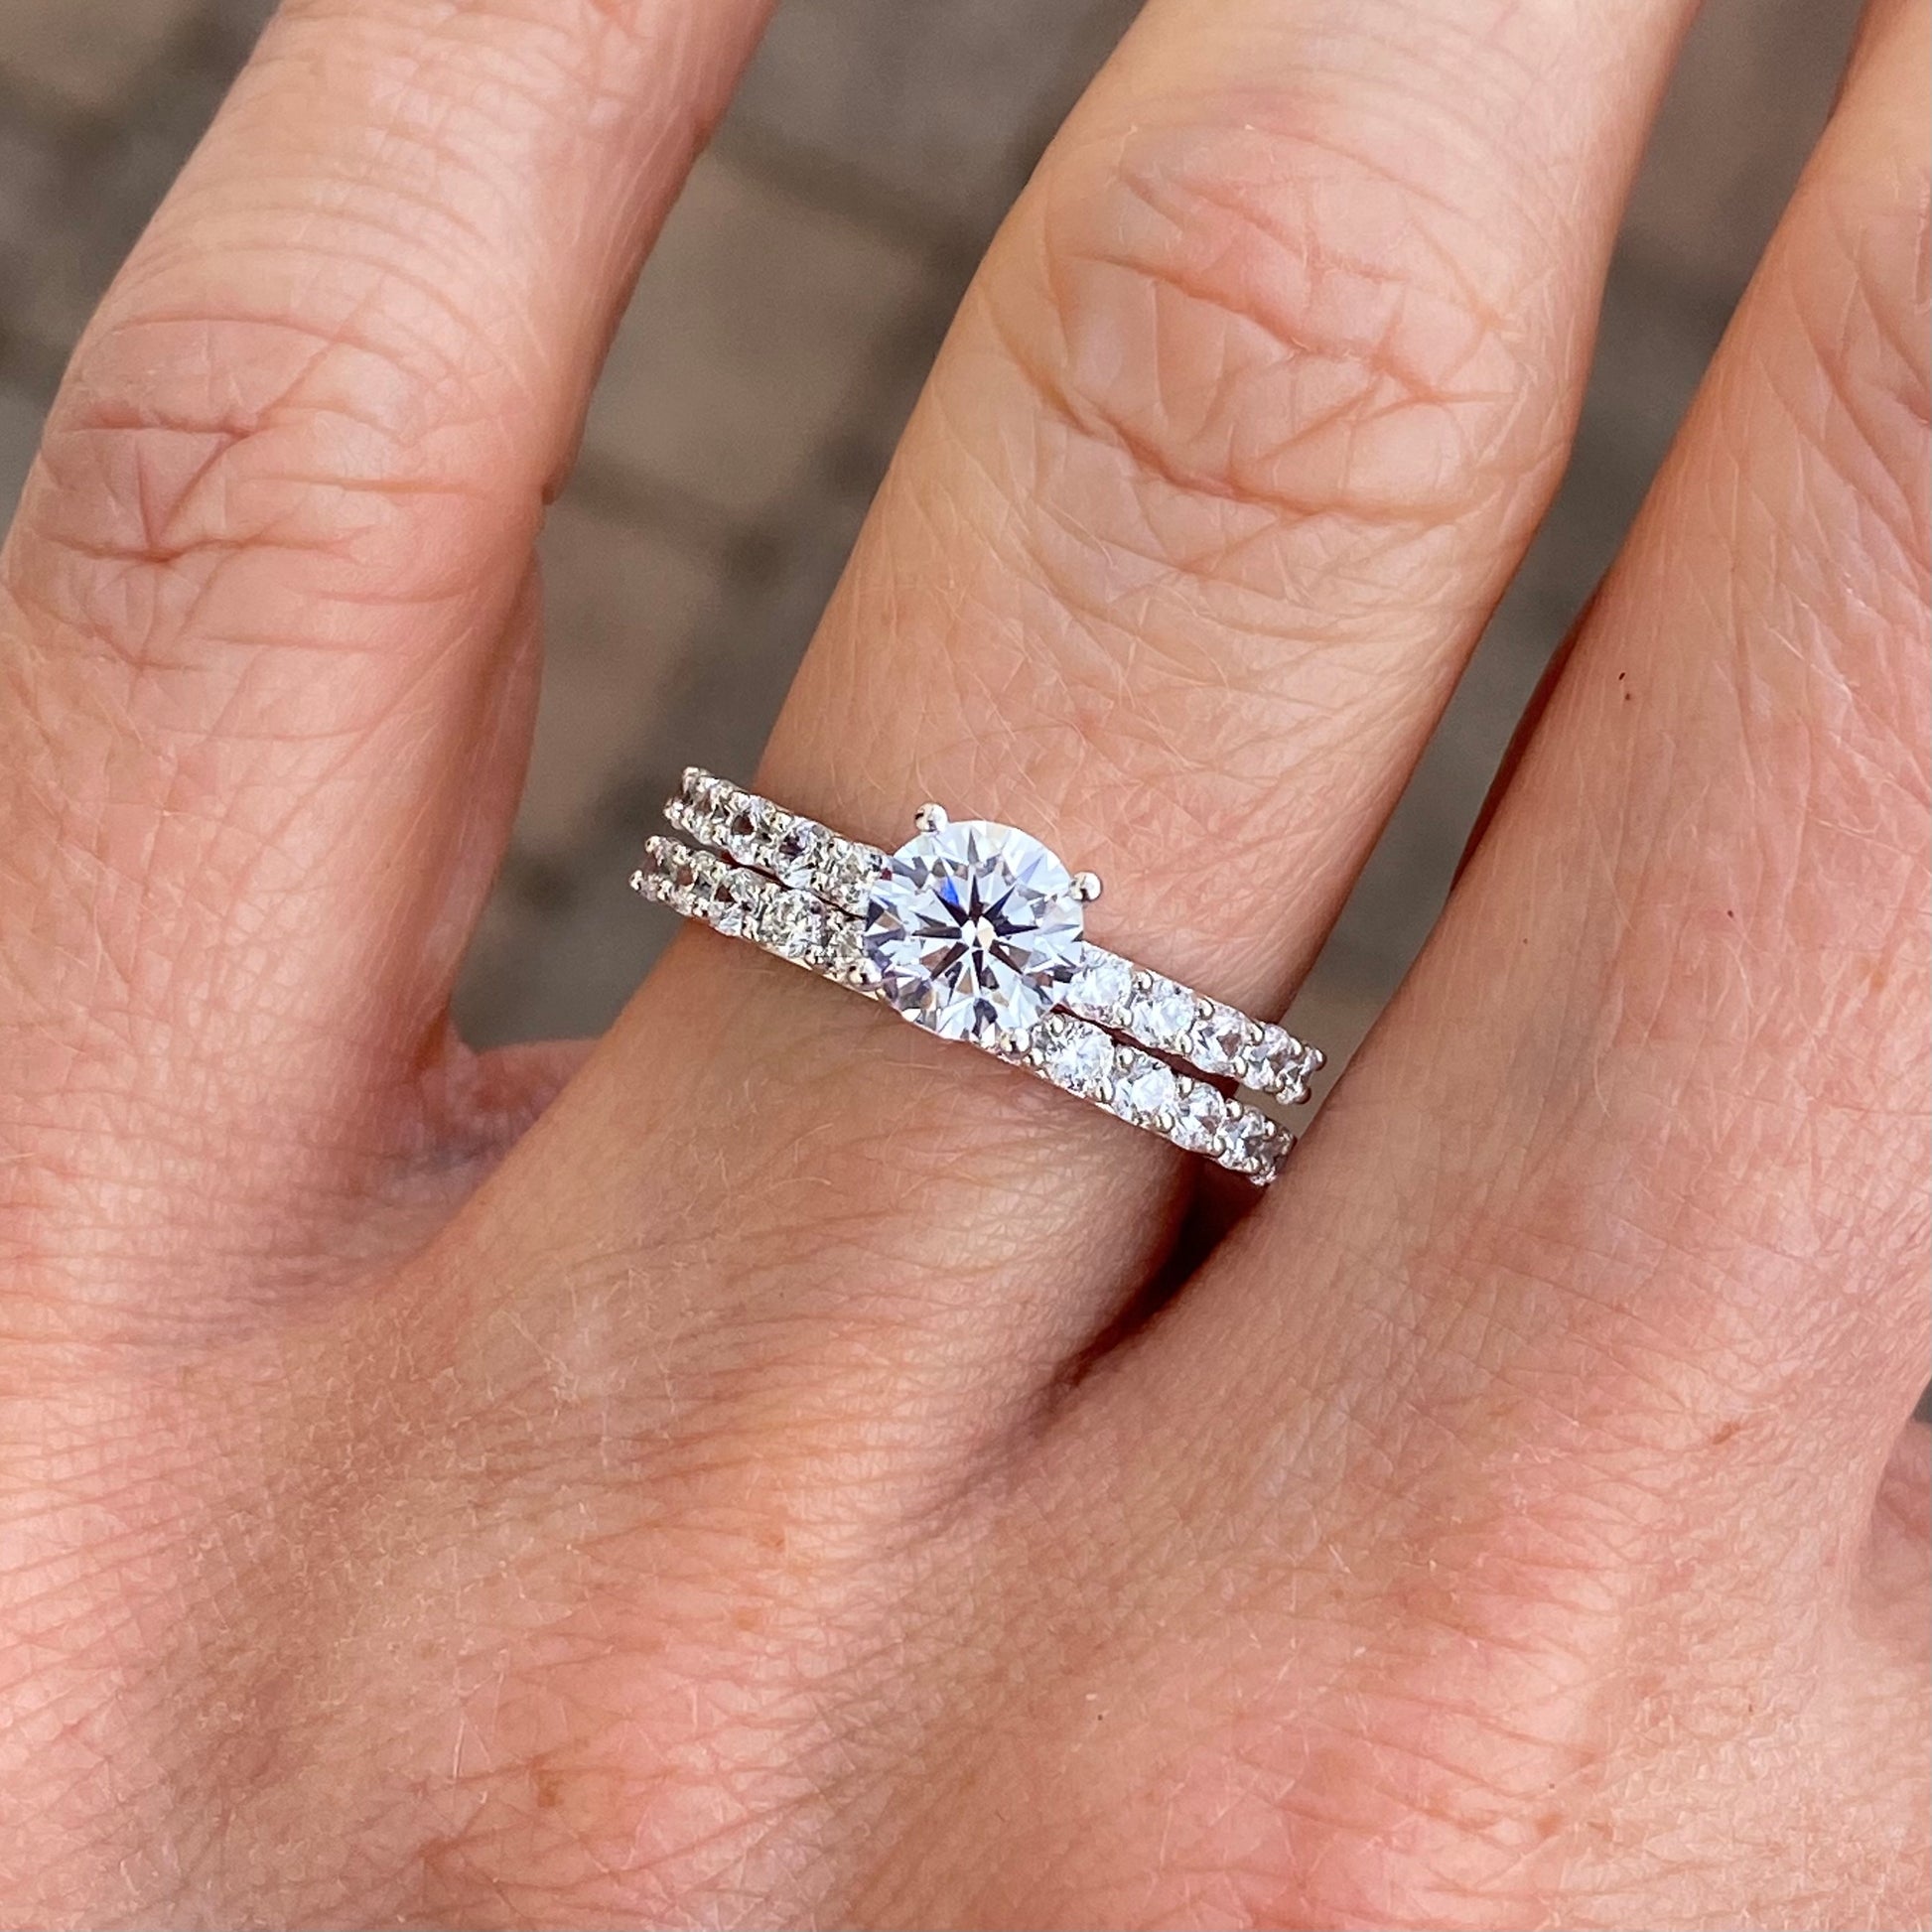 9ct White Gold CZ Solitaire Ring - John Ross Jewellers